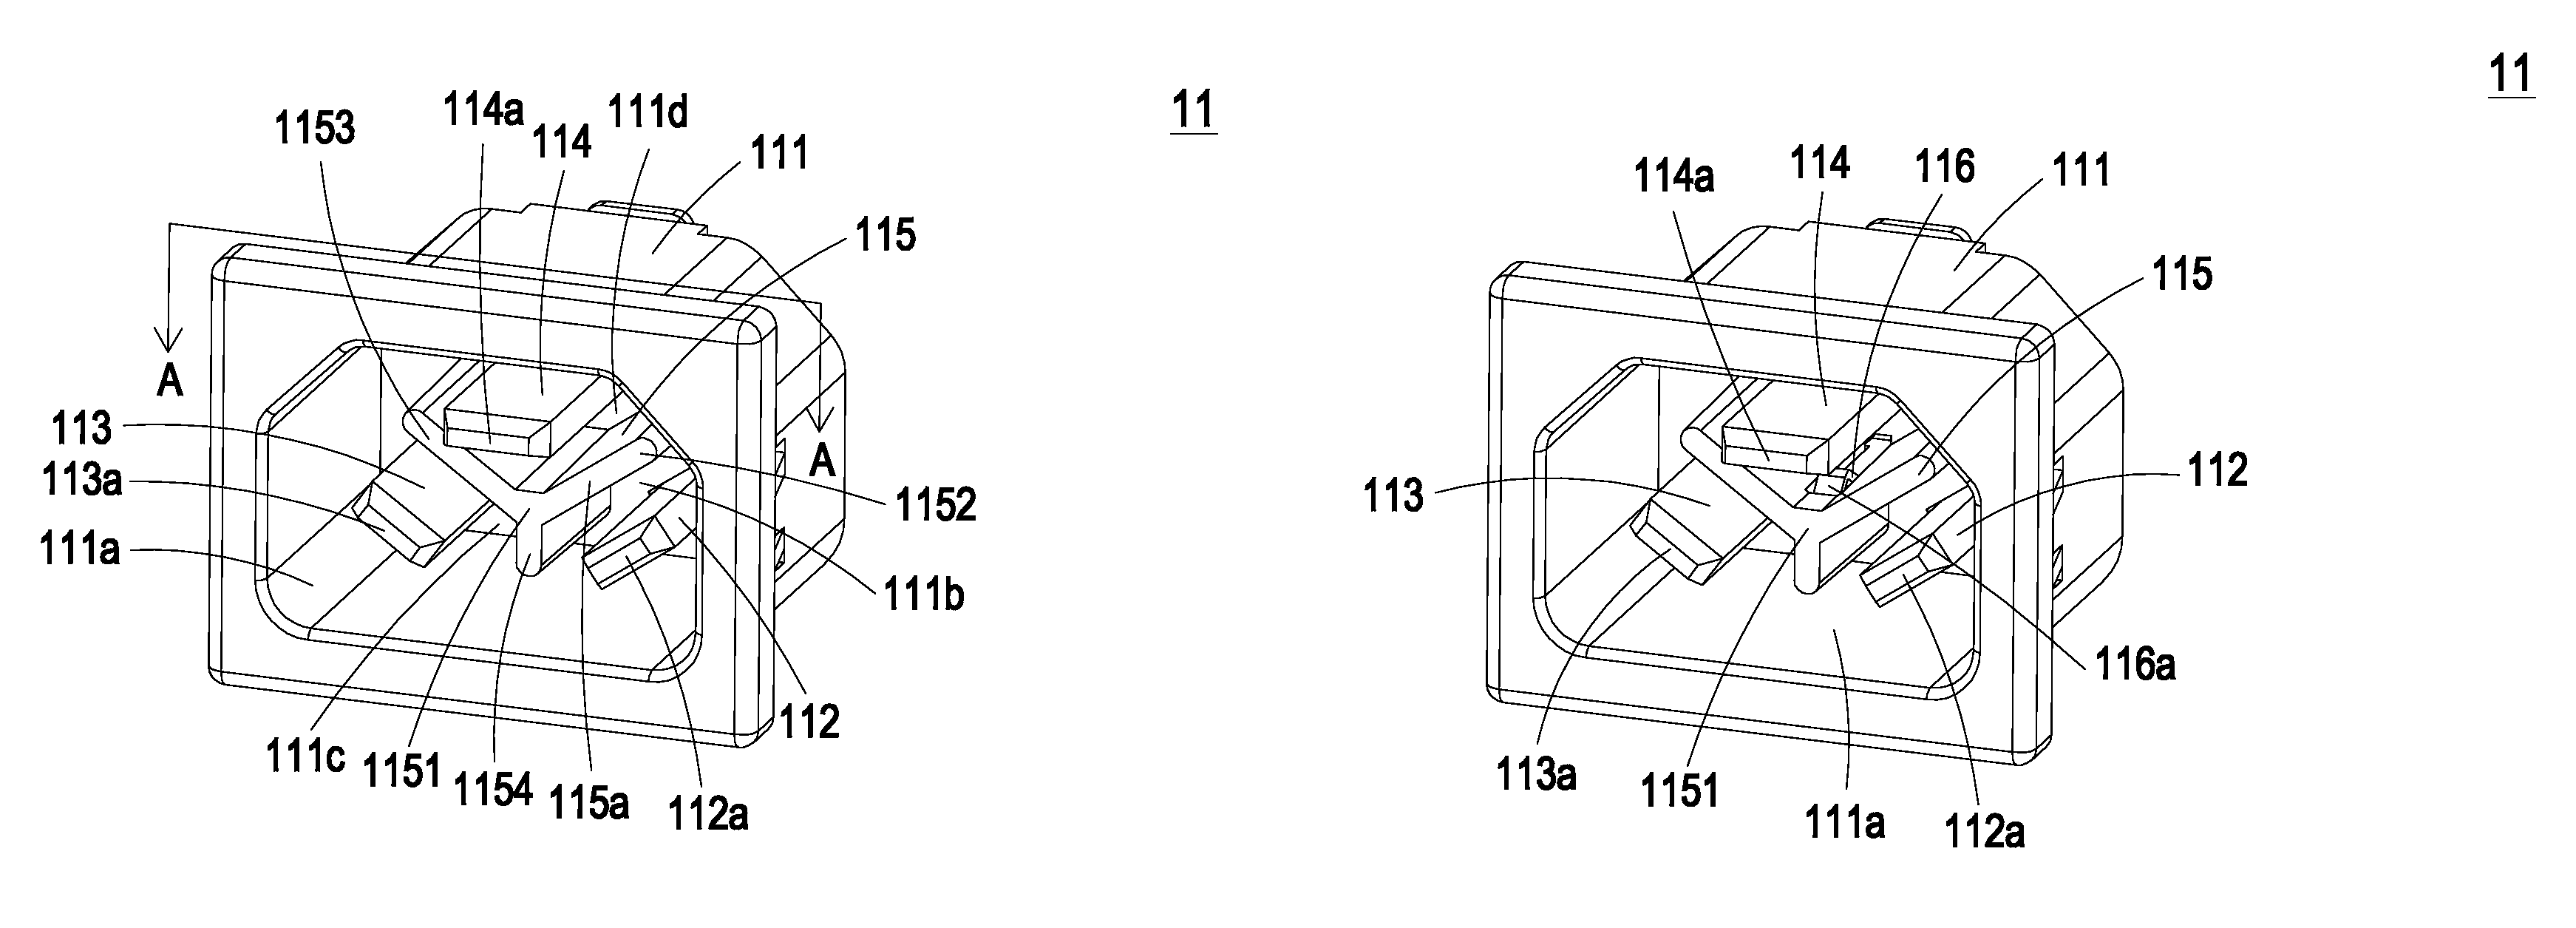 Power connector having a signal detecting terminal on a separation member